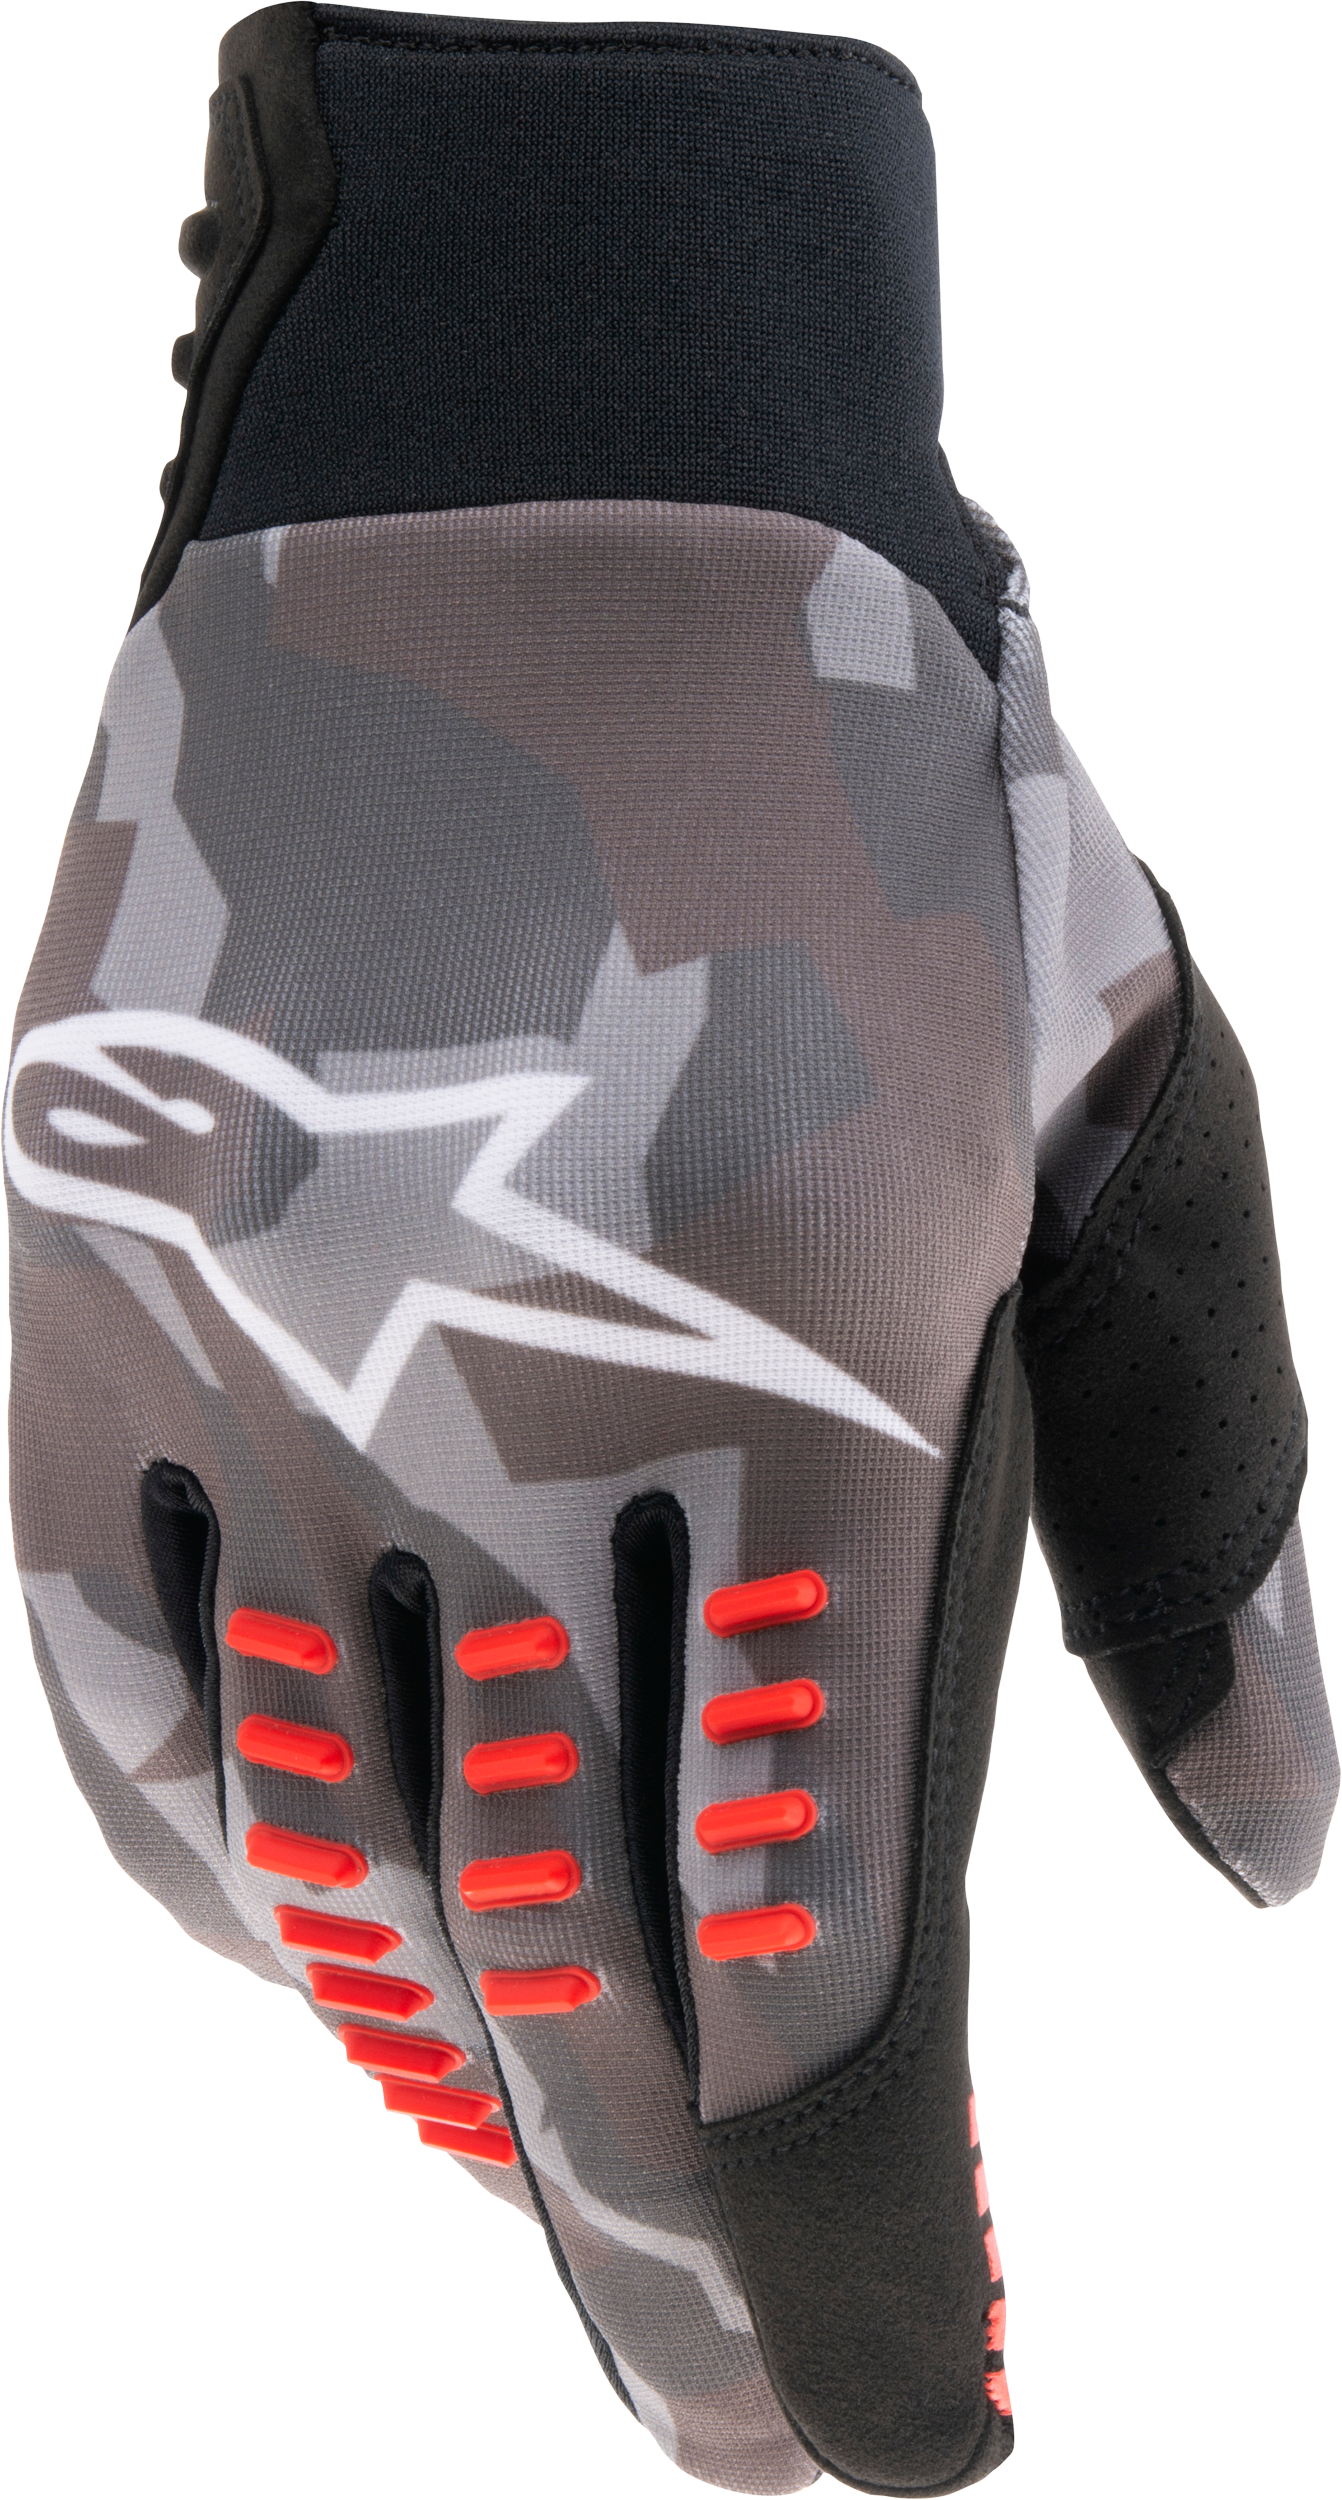 SMX-E GLOVES GREY CAMORED FLUO